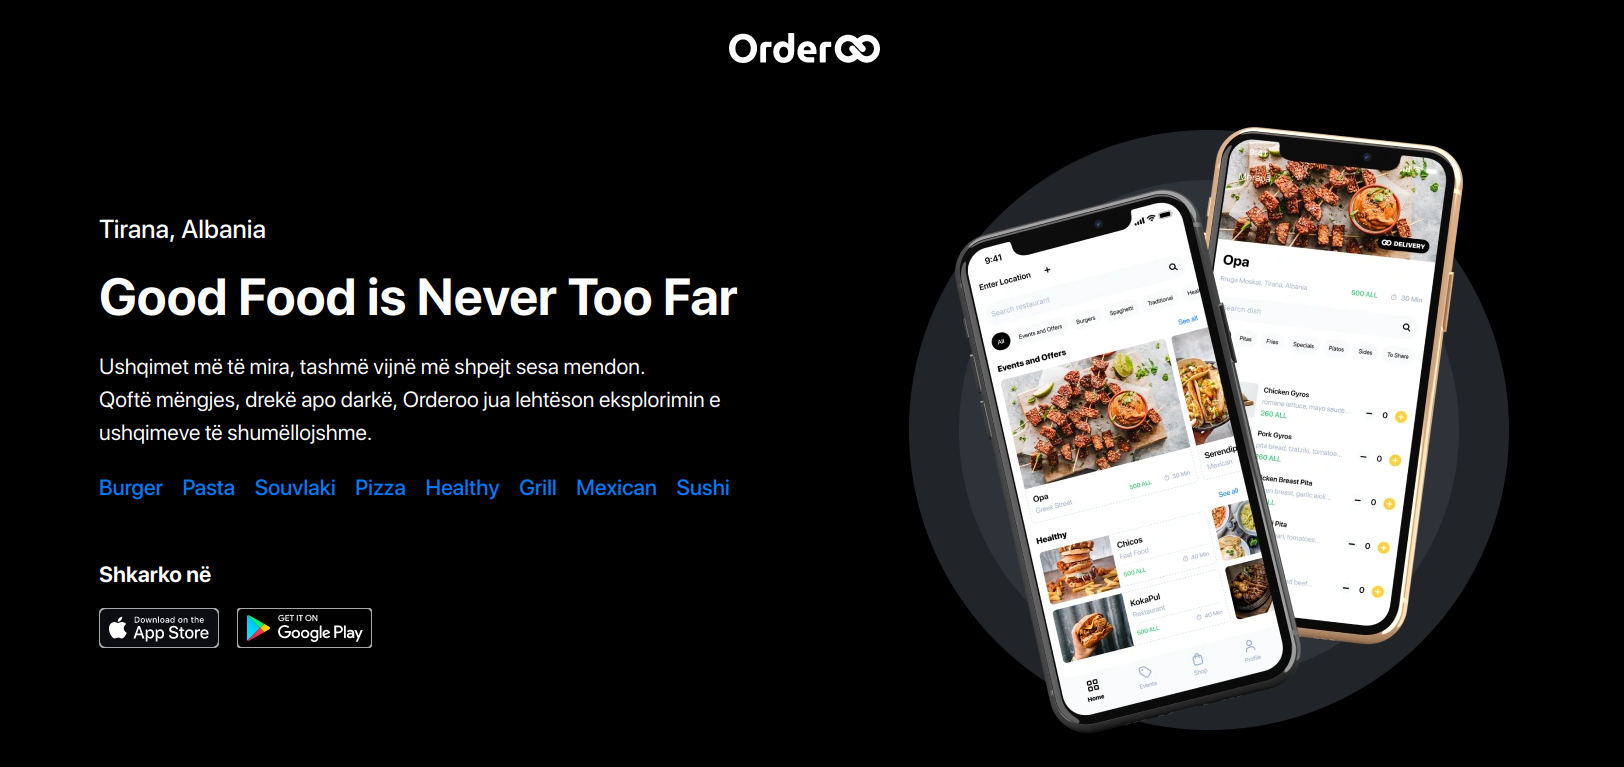 transforming-food-delivery-with-orderoo-s-innovative-platform